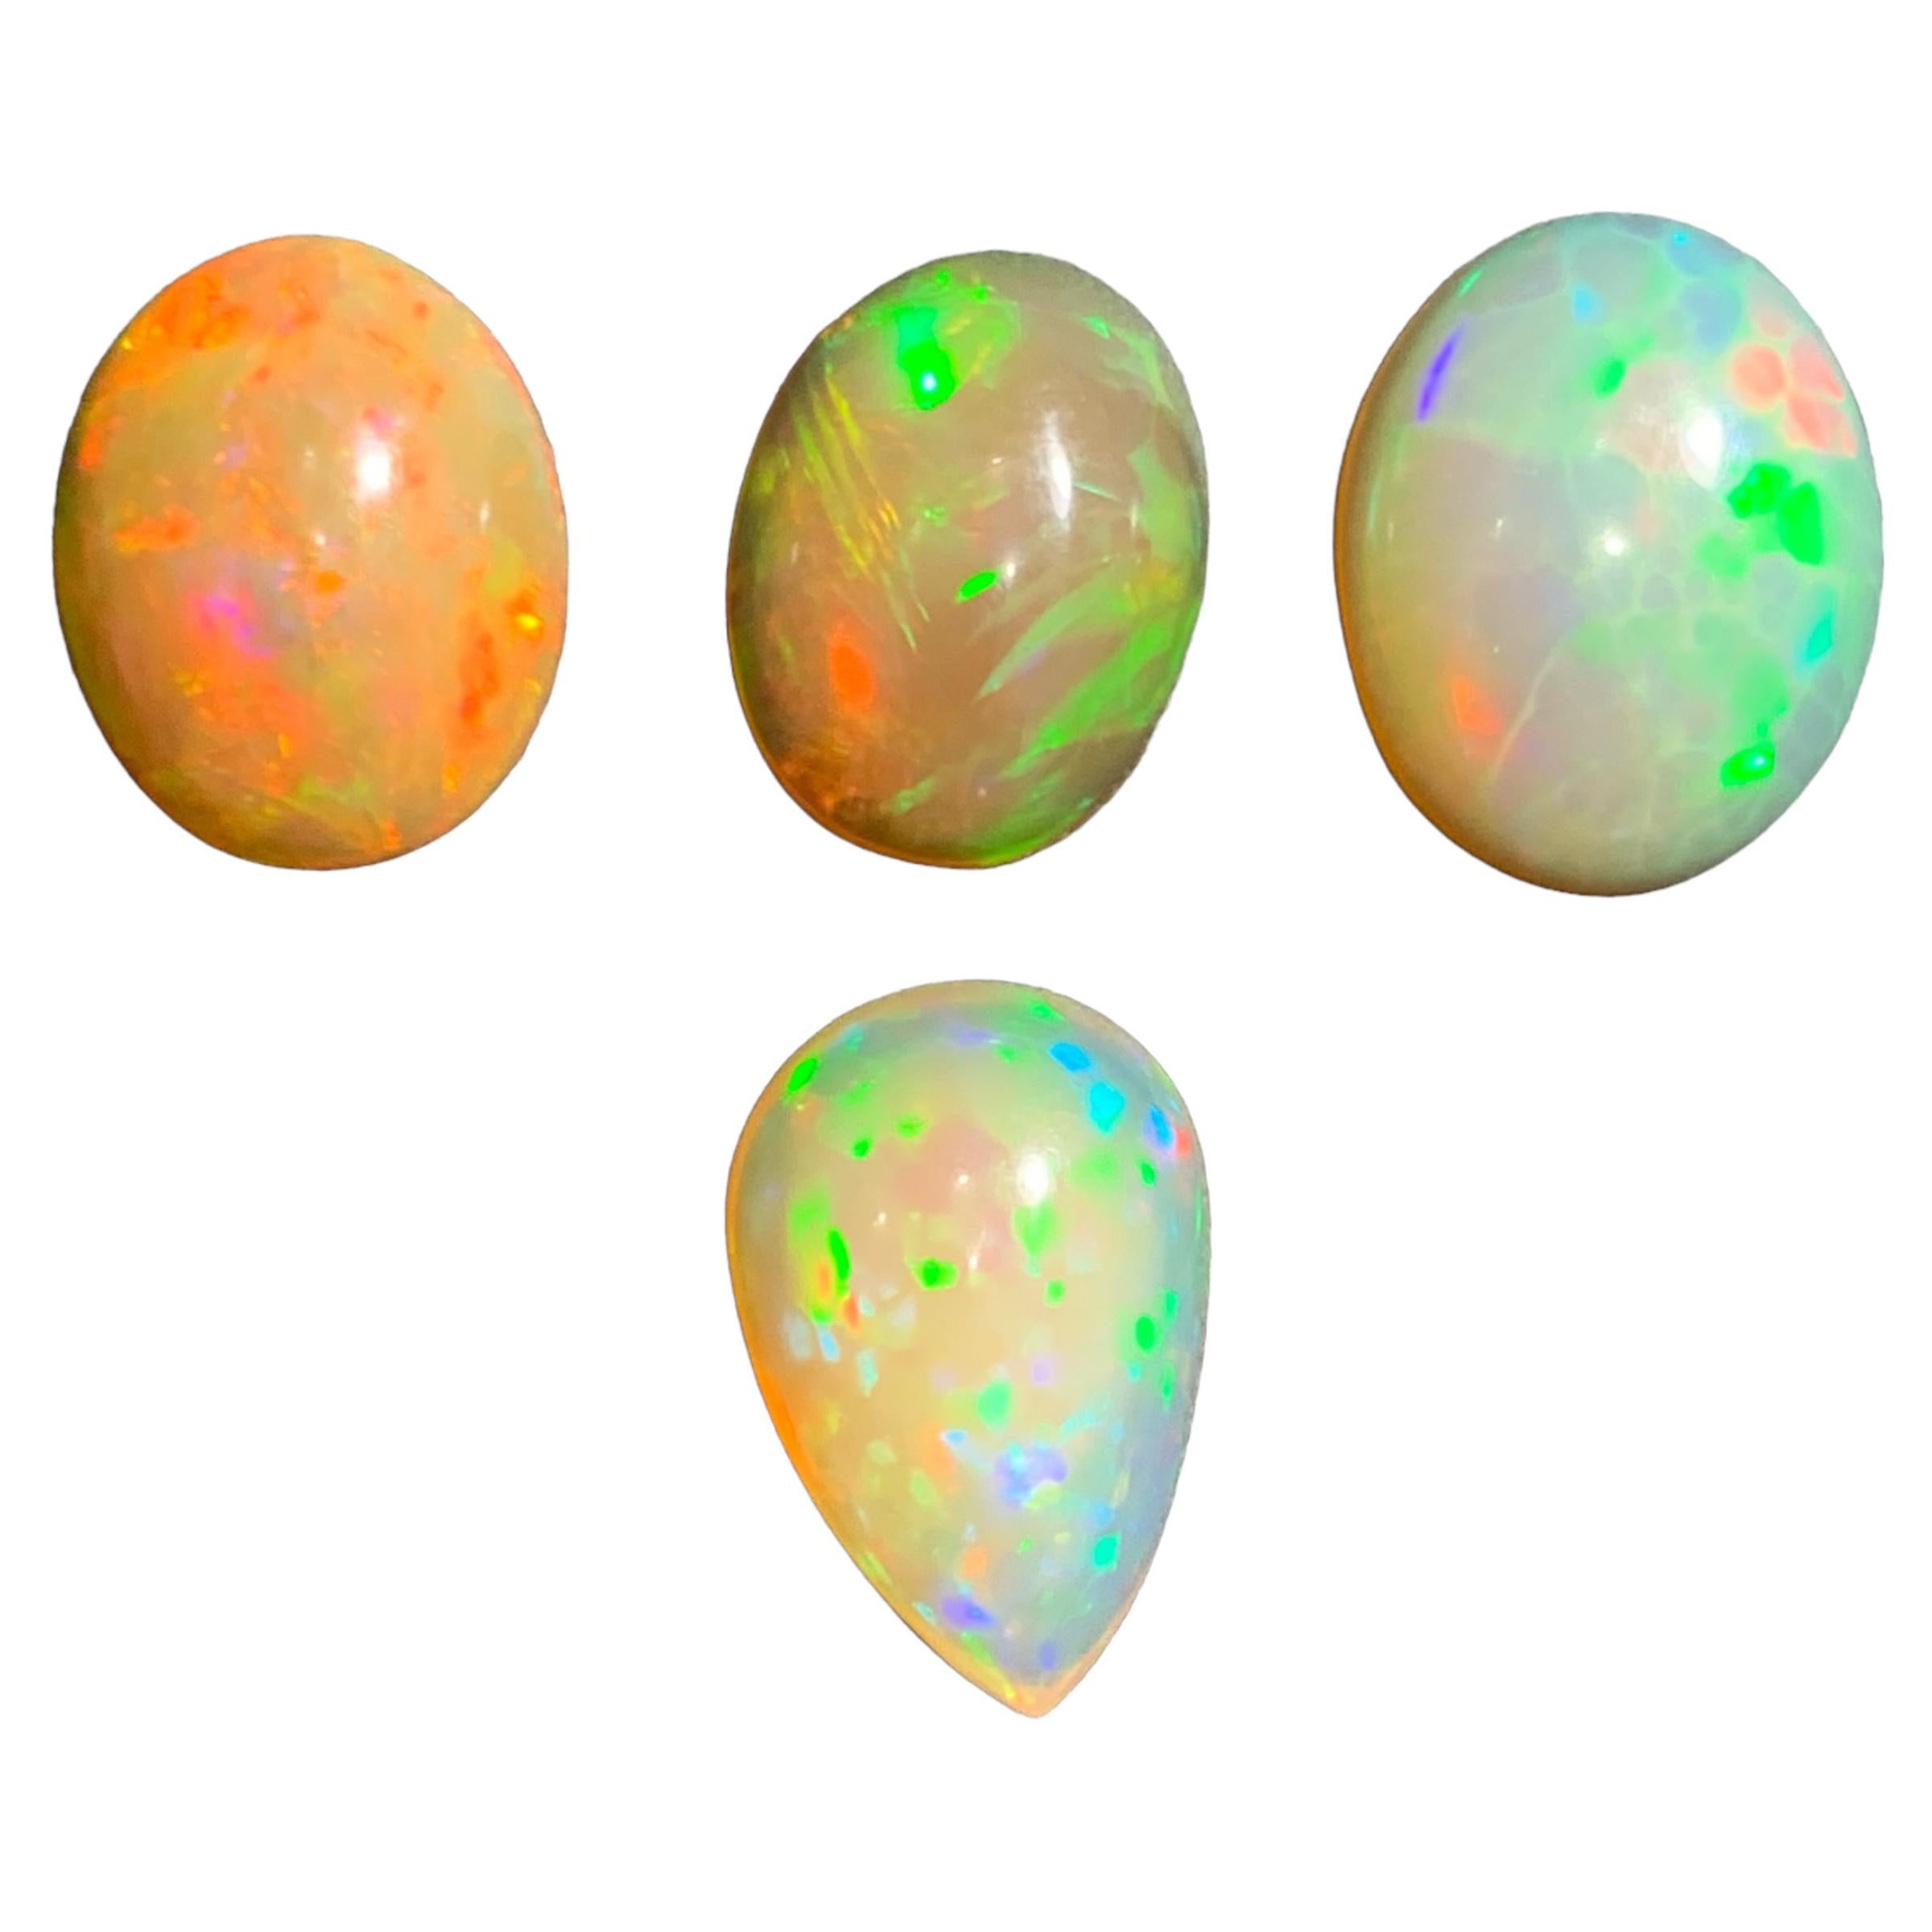 GEMSTONE TYPE: Opal
PIECE(S): 4
WEIGHT: 15 Carats
SHAPE: Oval and Pear Shape Cabochons
SIZE (MM): 
3.25 Ct: 12.34 x 9.90 x 5.80
3.00 Ct: 12.41 x 9.49 x 5.20
4.10 Ct: 13.68 x 10.98 x 5.46
4.65 Ct: 14.29 x 9.44 x 7.25
COLOR: Orange Play of